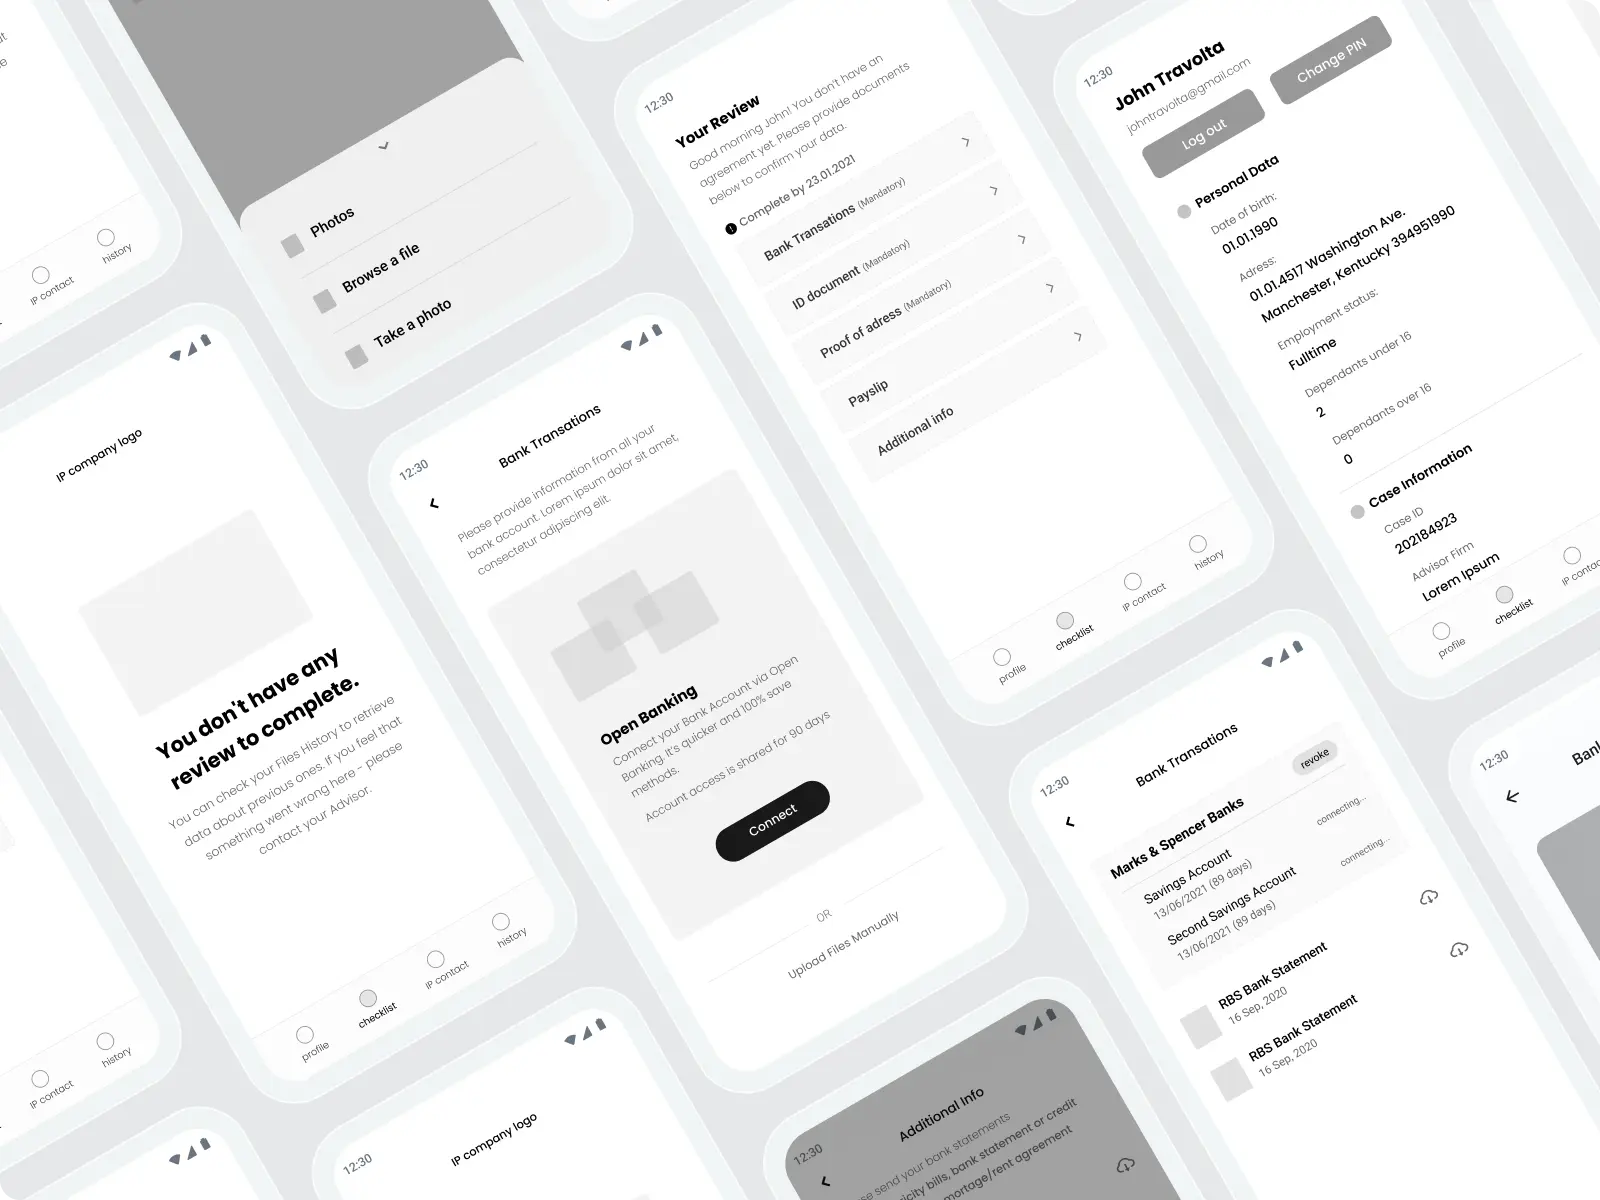 Black-and-white wireframes showing the functionality of open banking and annual review check